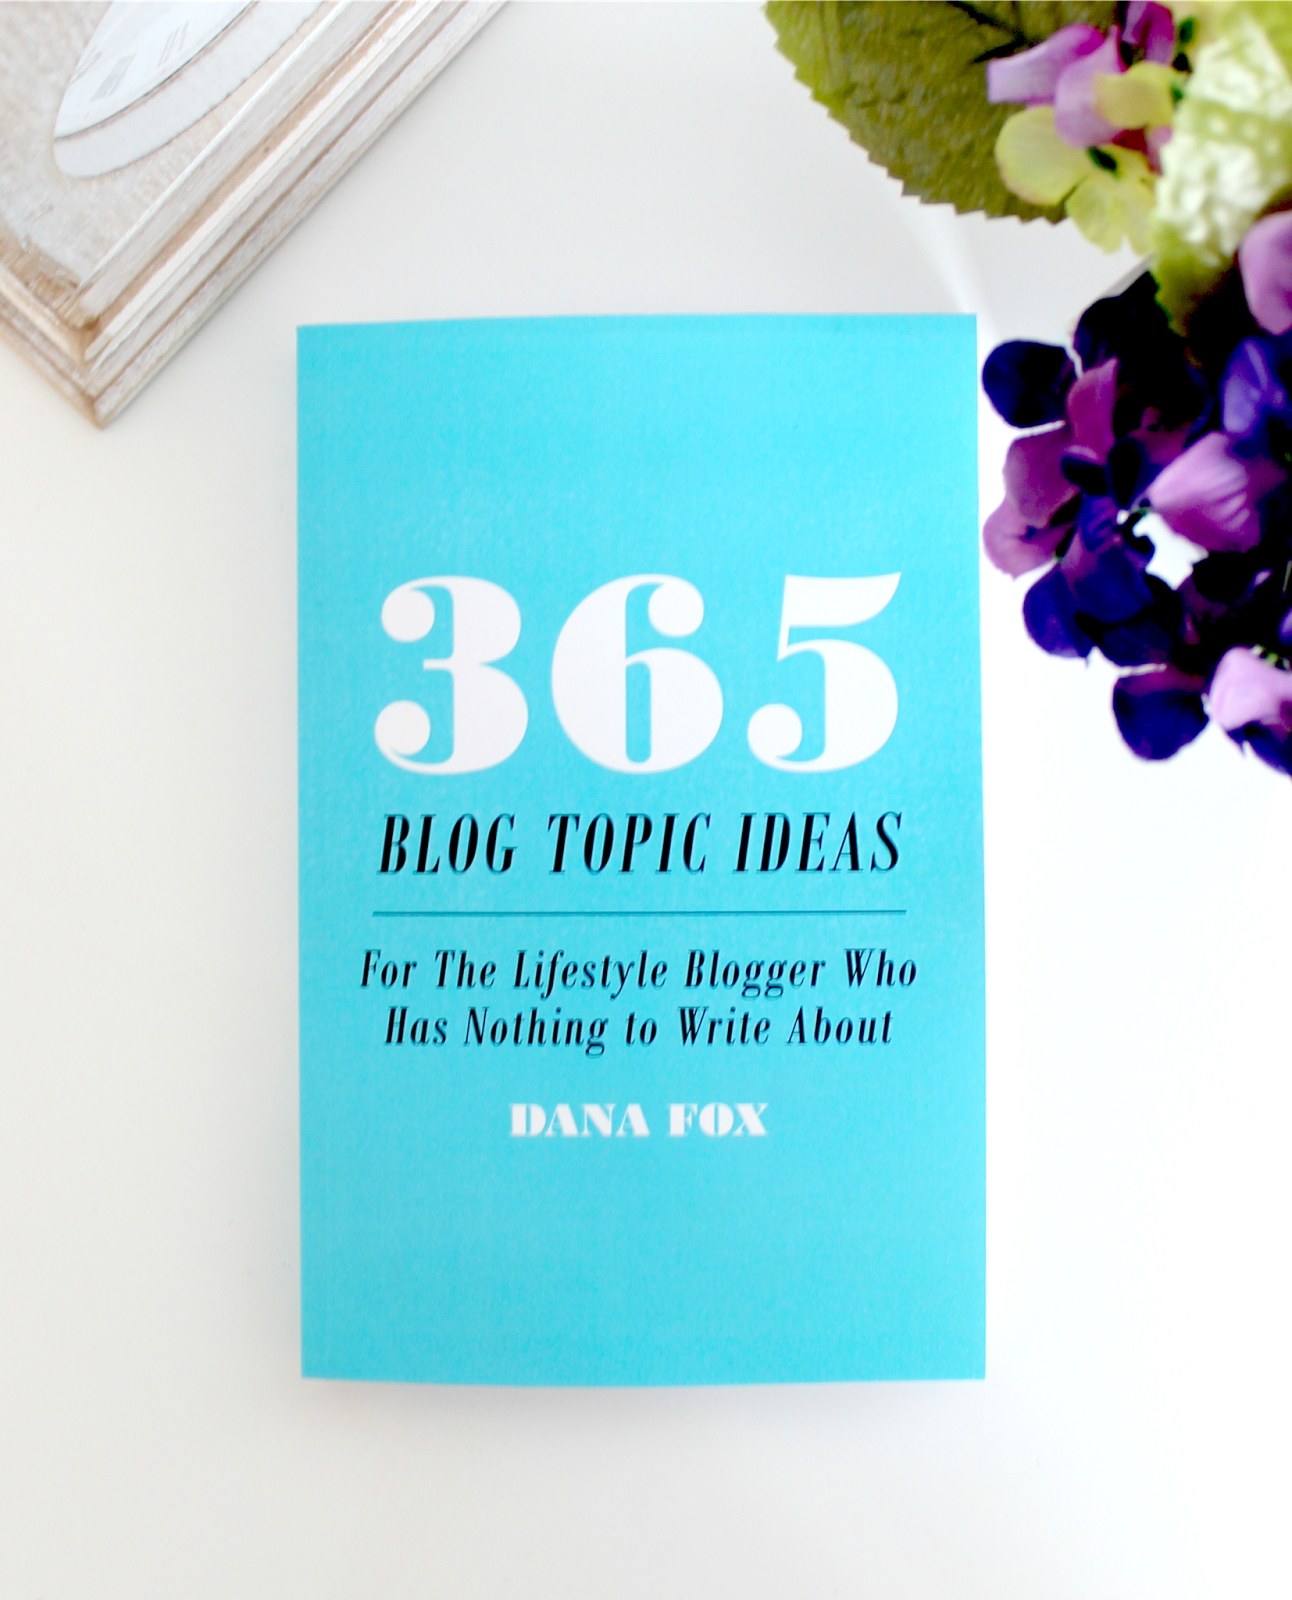 365 Blog Topic Ideas For The Lifestyle Blogger Who Has Nothing to Write About, 365 Blog Topic Ideas For The Lifestyle Blogger Who Has Nothing to Write About Book Review, Dana Fox Wonder Forest Book